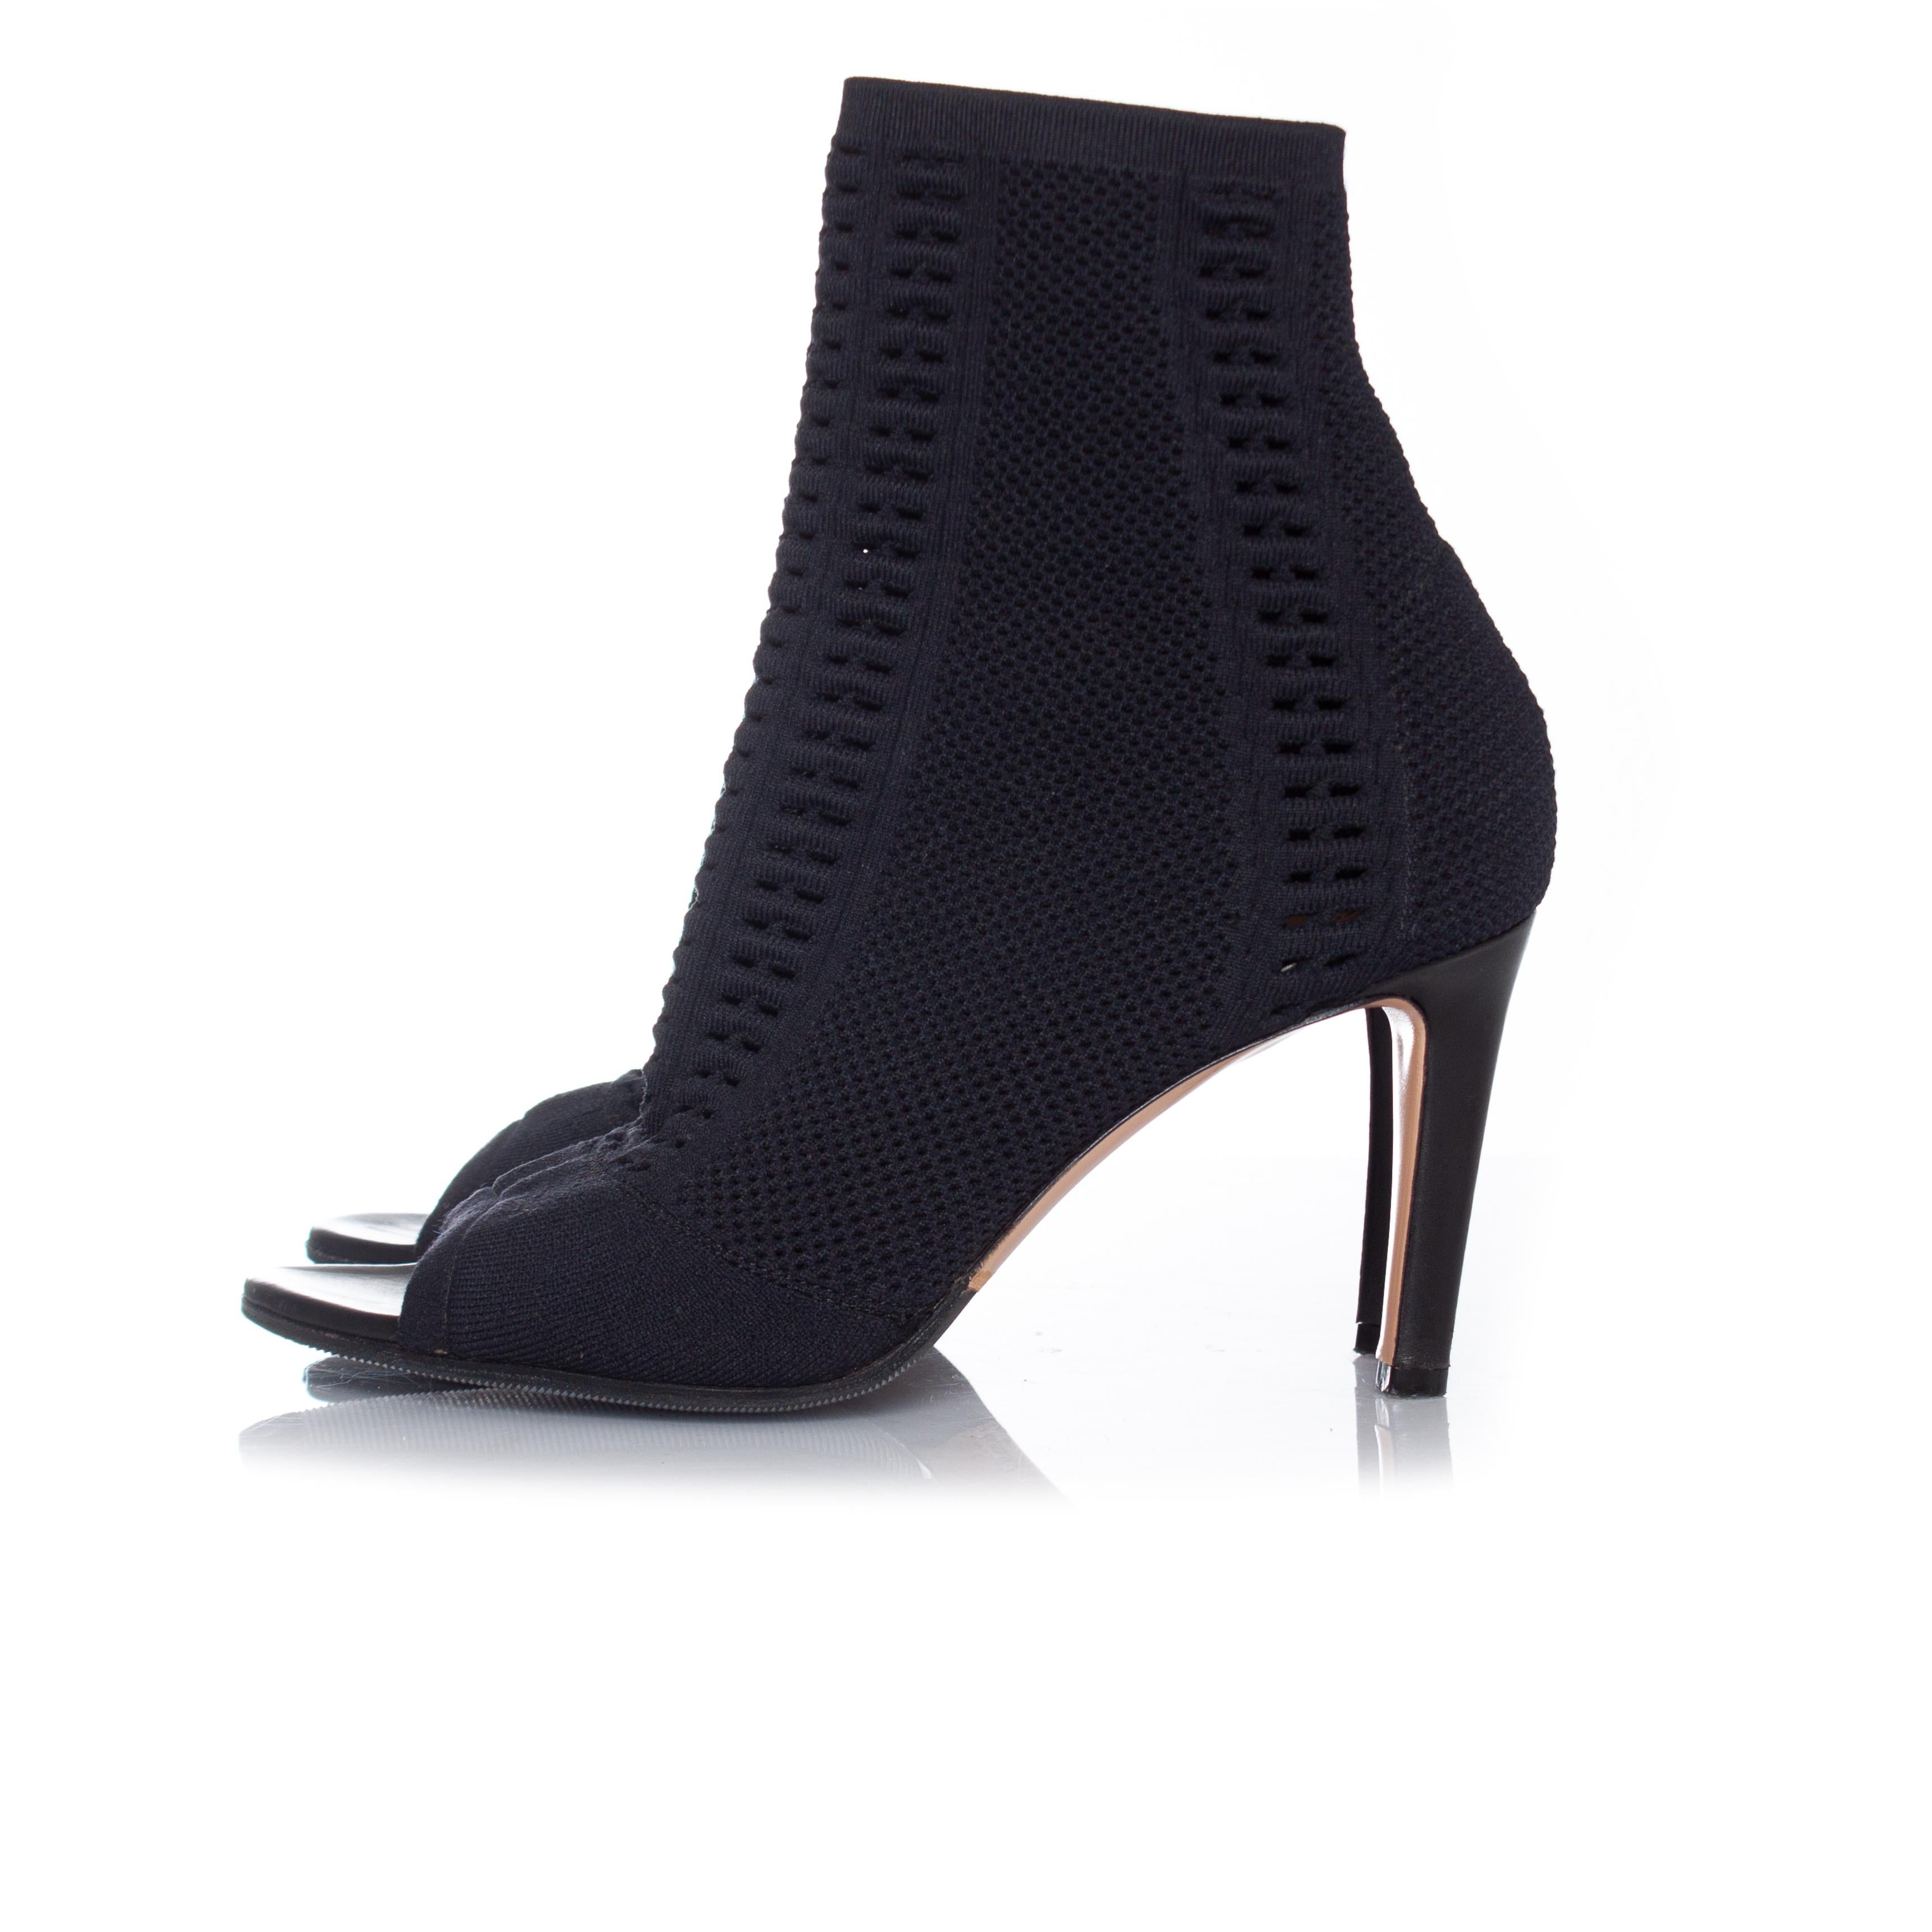 Gianvito Rossi, Stretch peep toe ankle boots For Sale 1